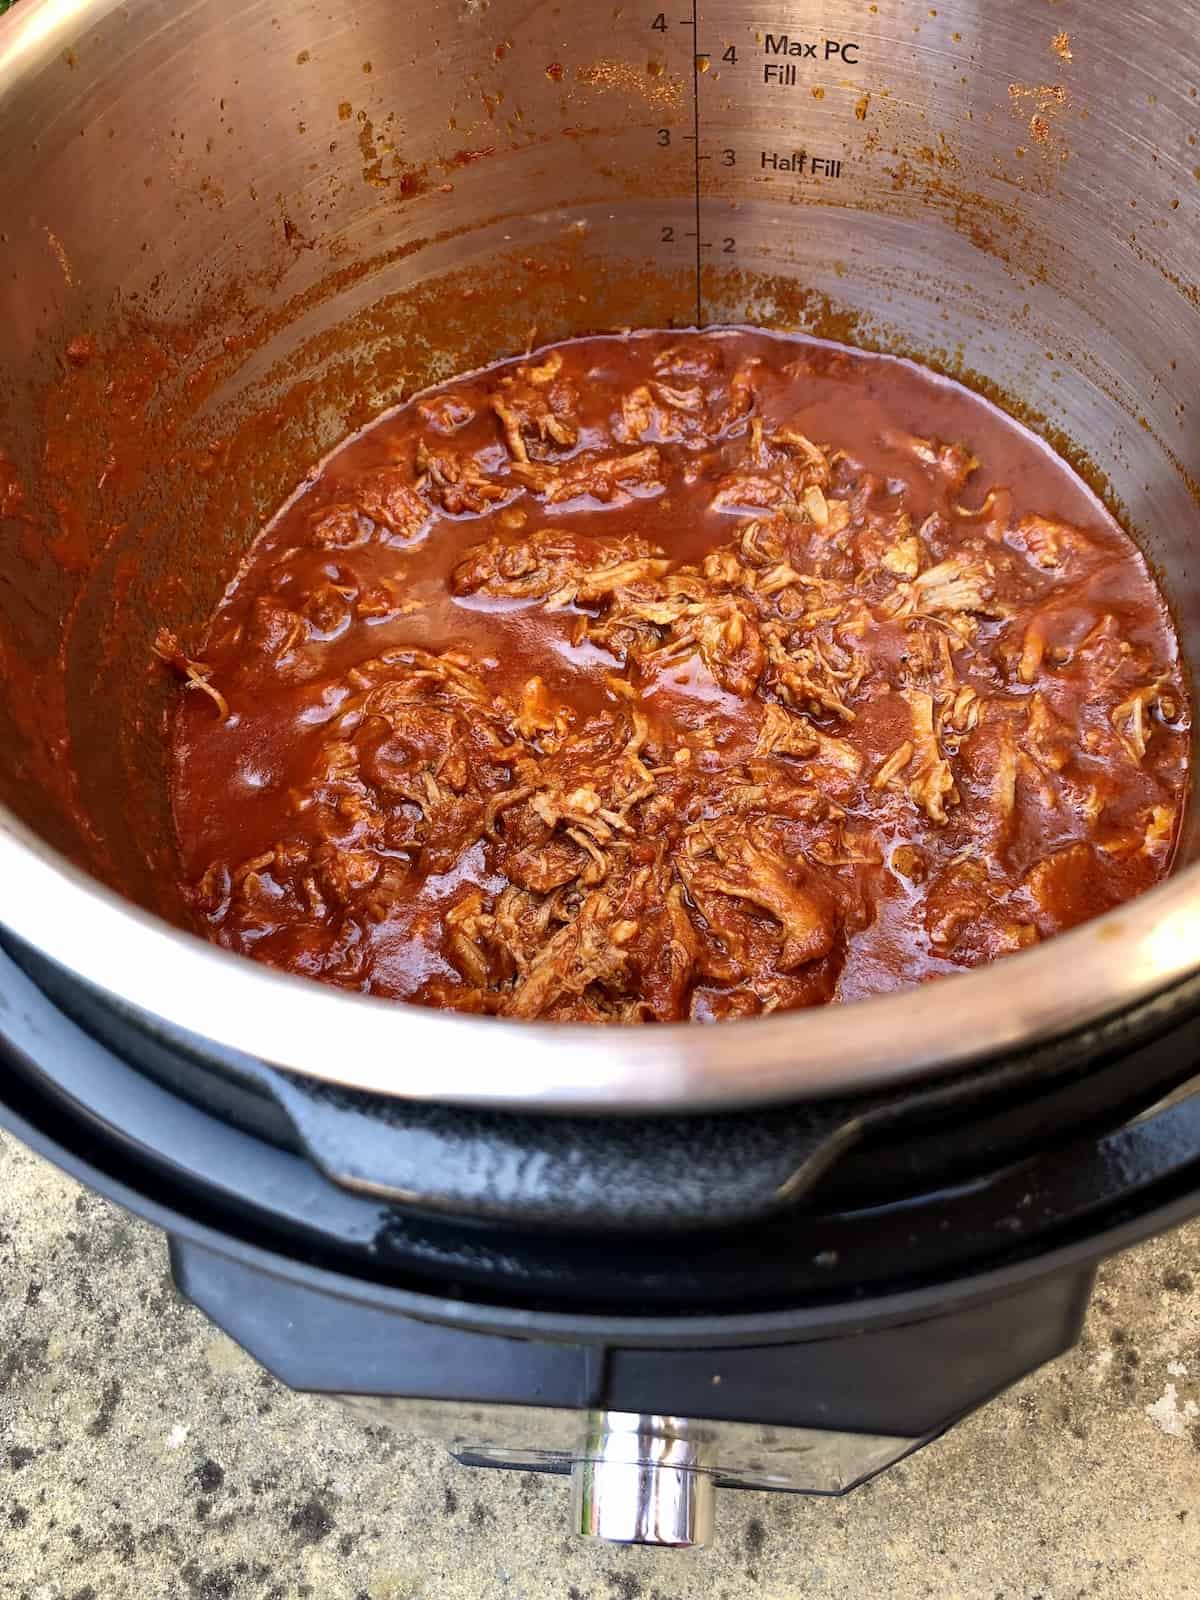 Photo of the BBQ Pulled Pork seen from above inside an Instant Pot Duo Evo Plus electric pressure cooker